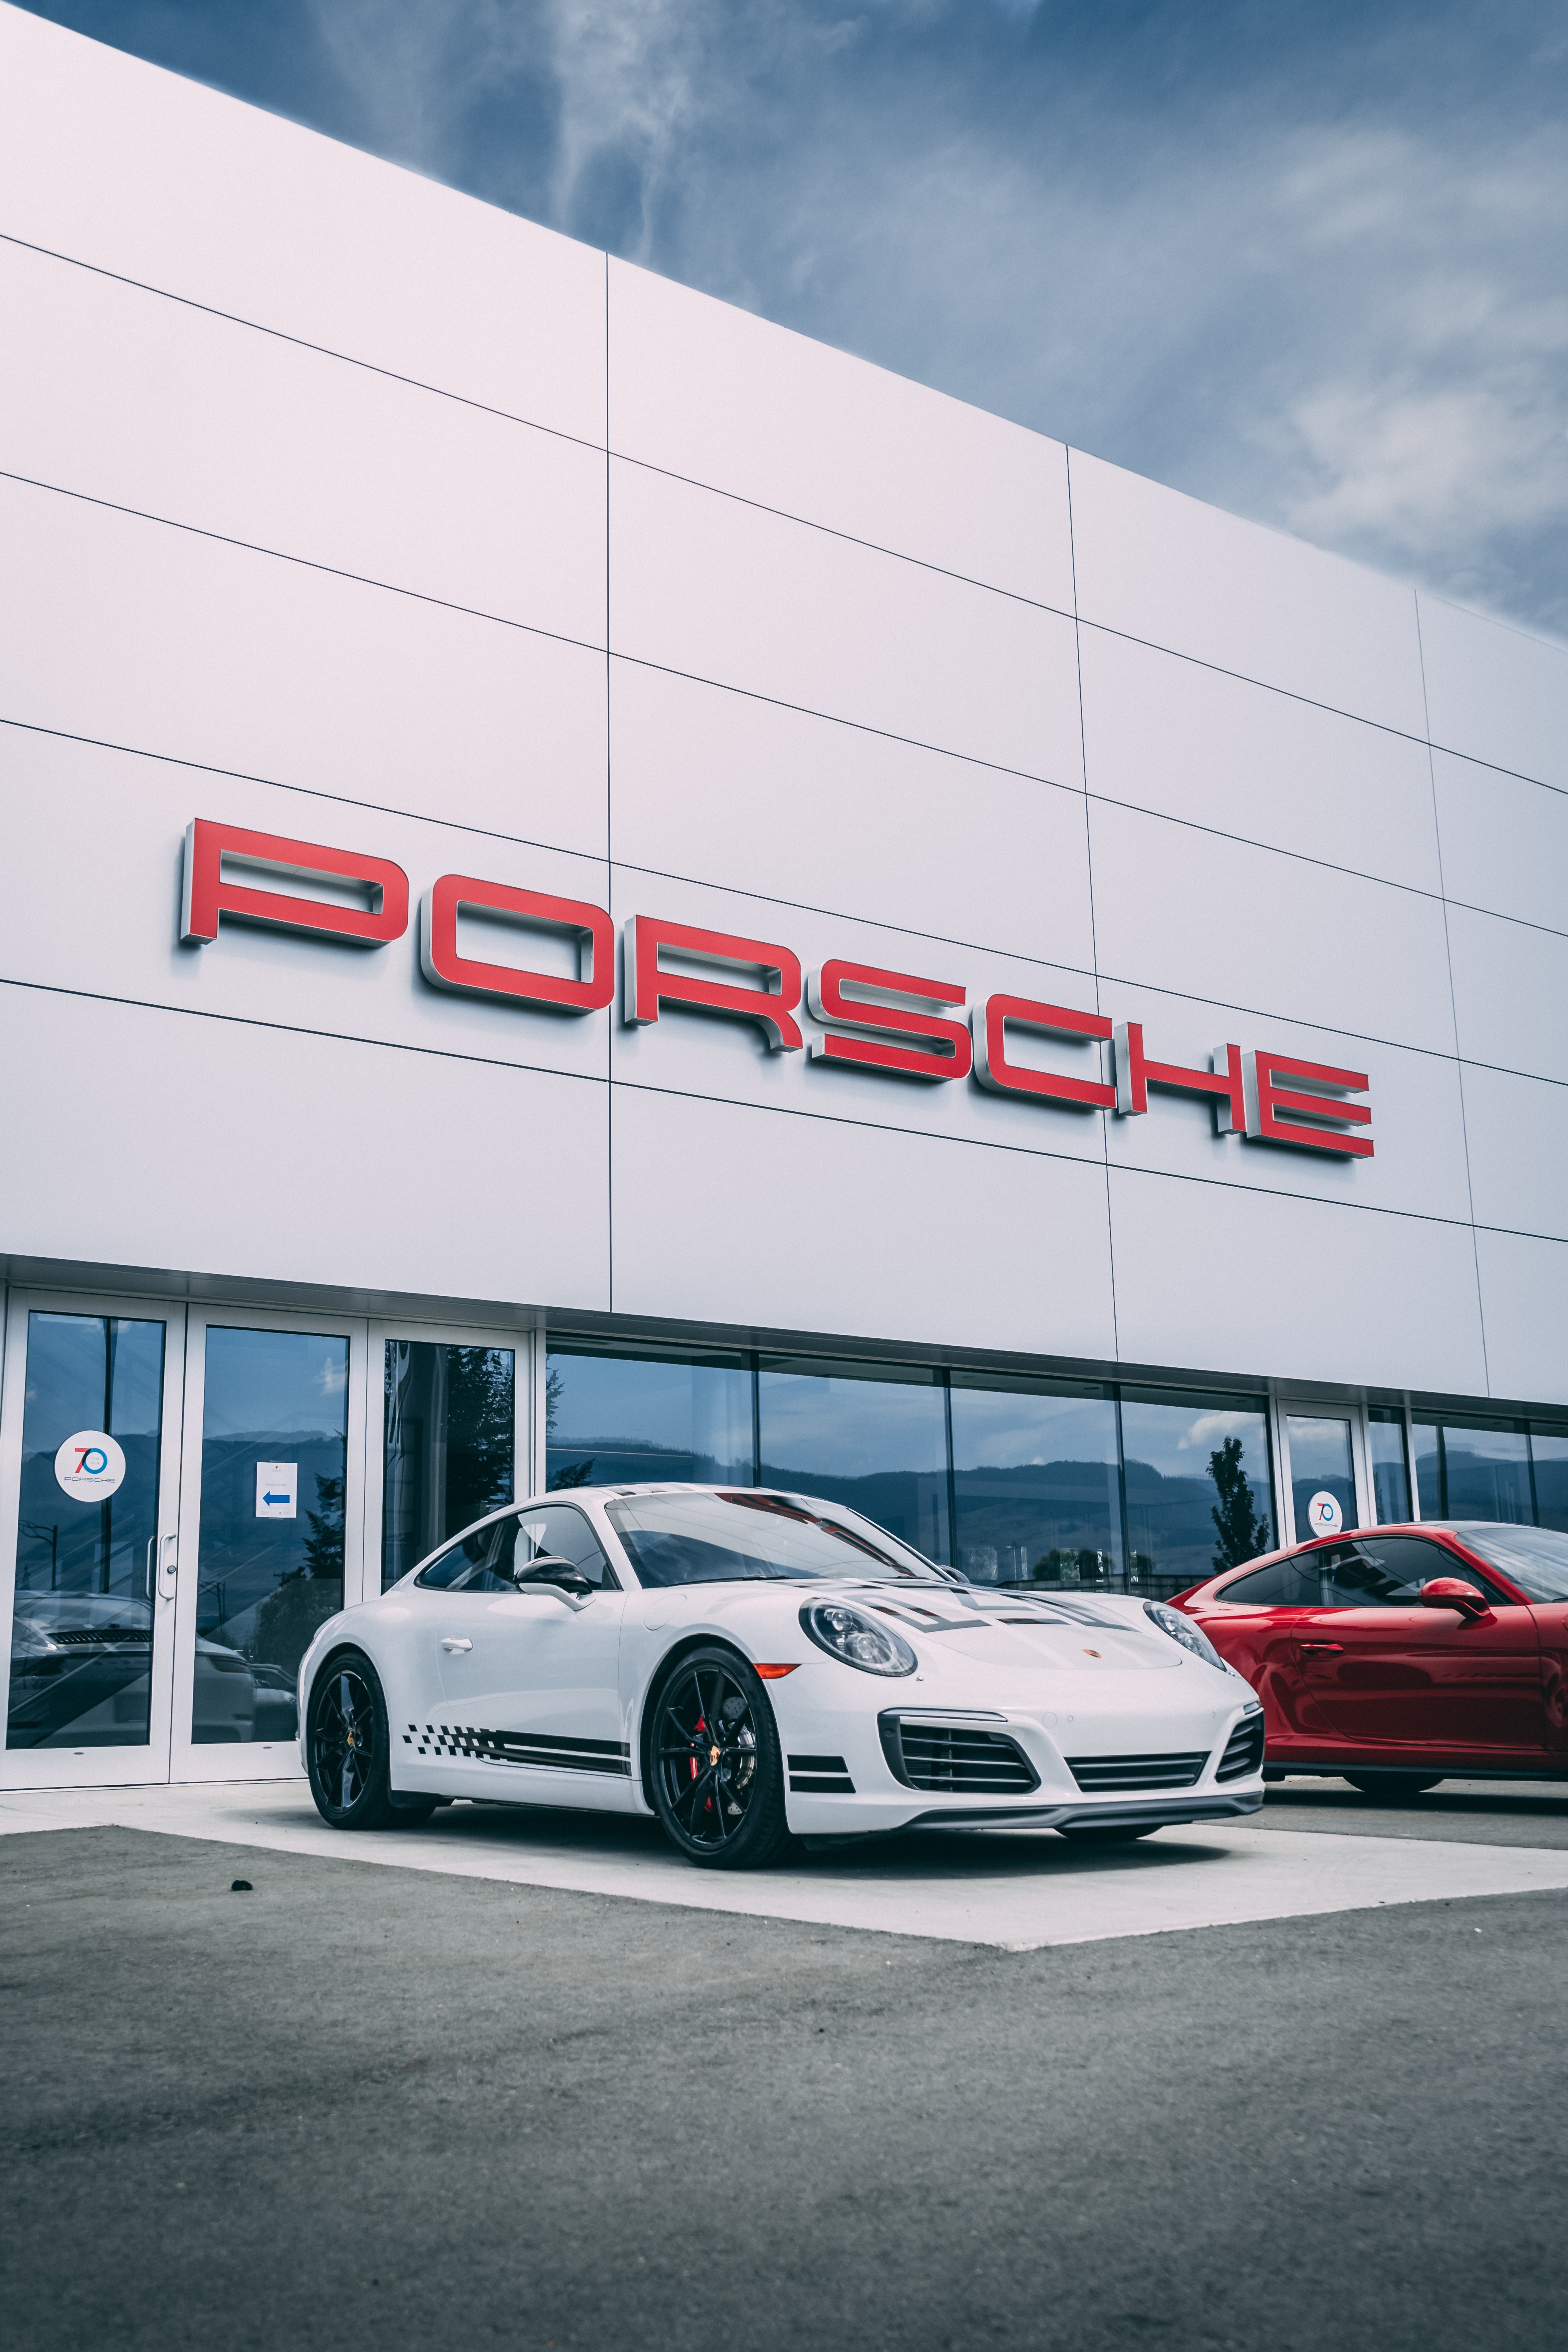 92511 free wallpaper 240x320 for phone, download images porsche, cars, luxurious, sports 240x320 for mobile